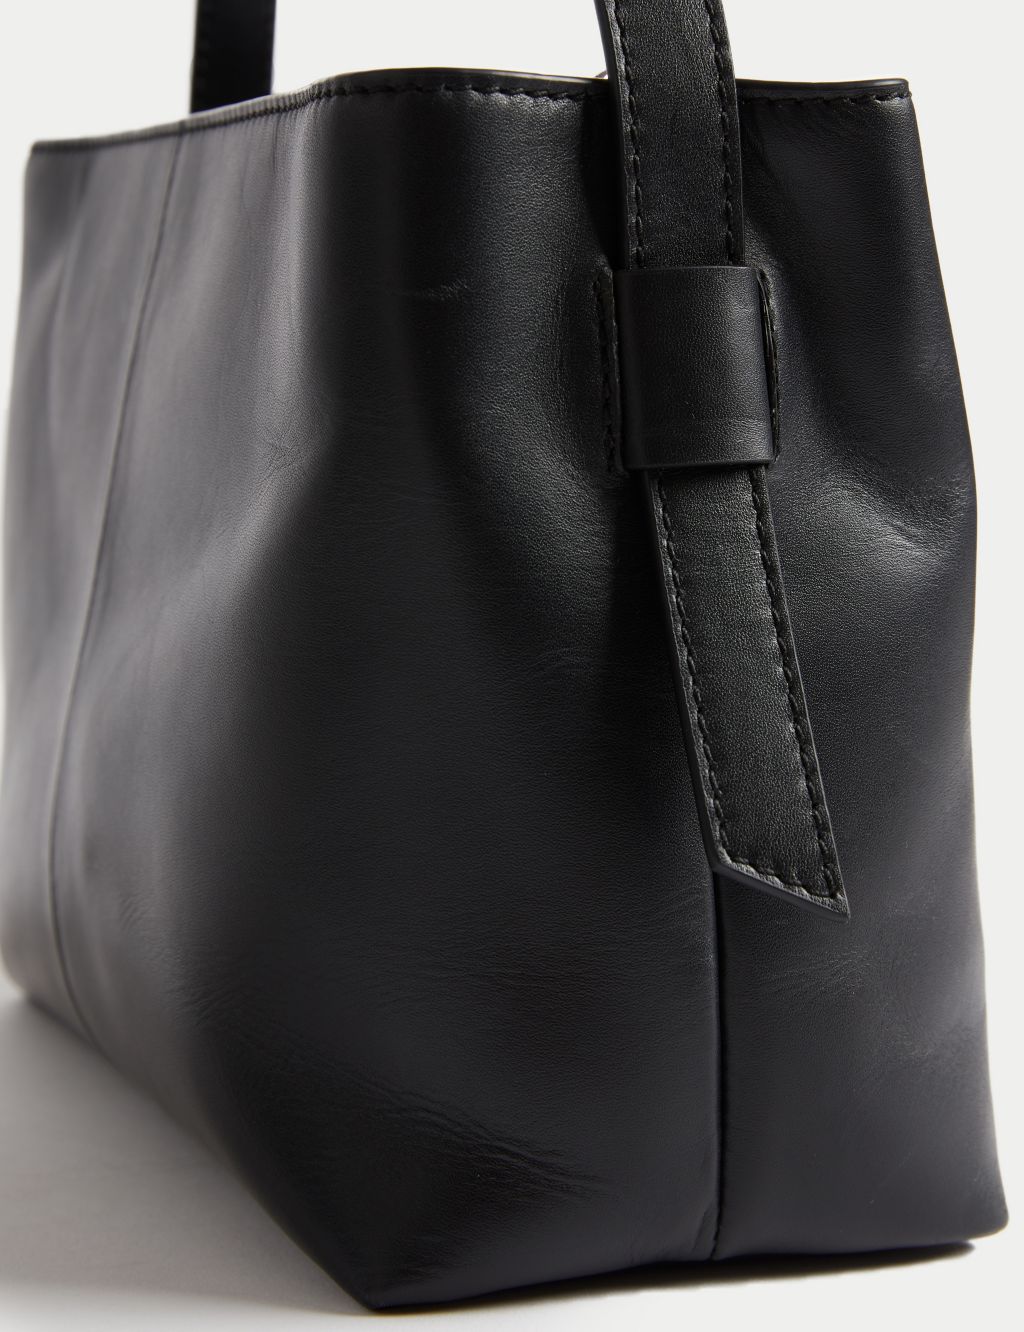 Leather Top Handle Shoulder Bag | M&S Collection | M&S